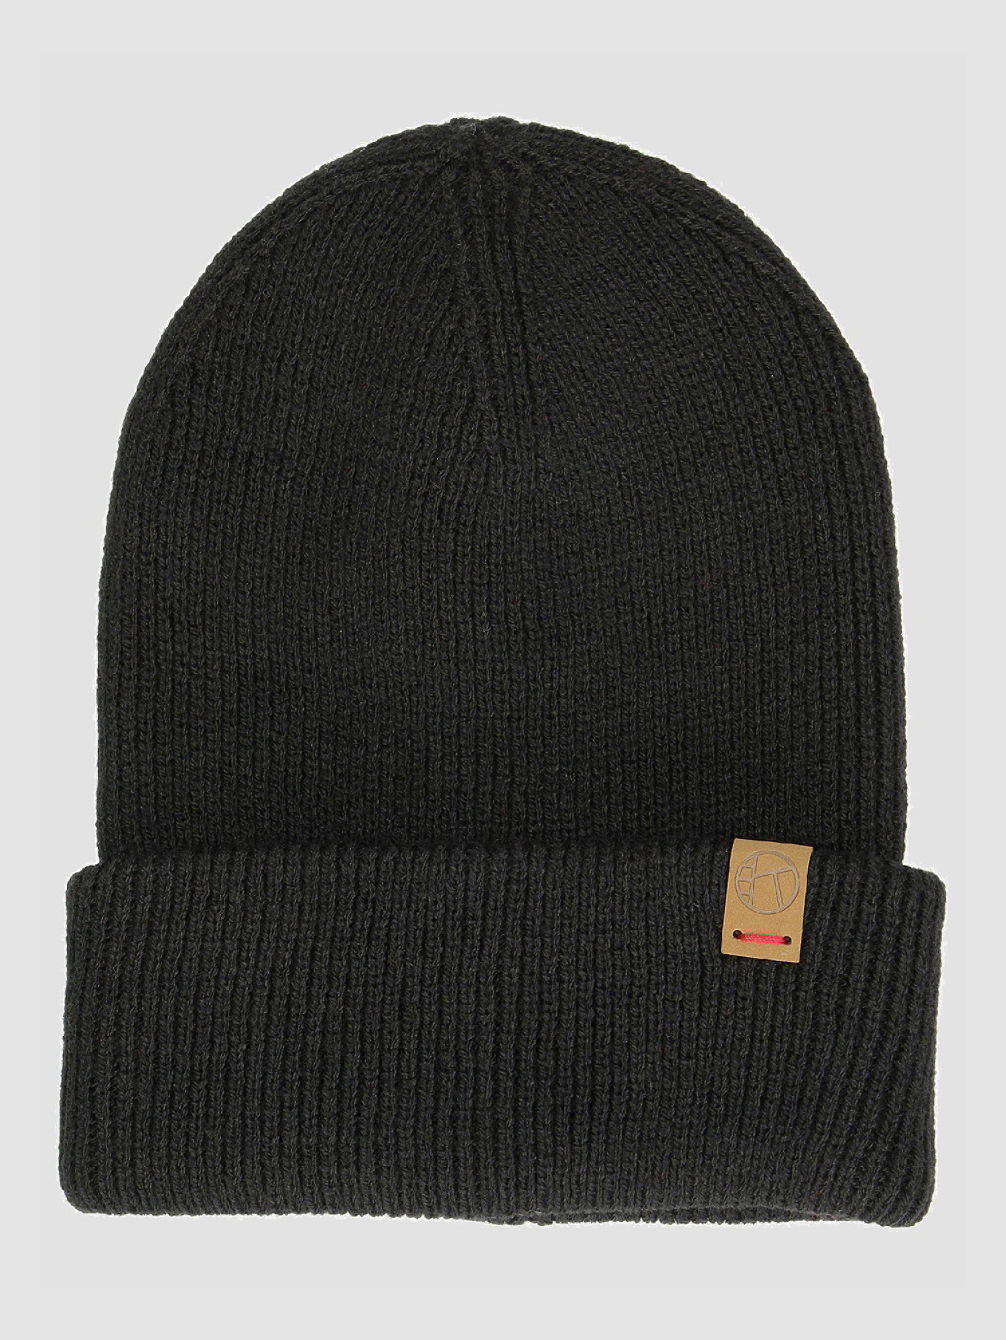 Andes Gorro